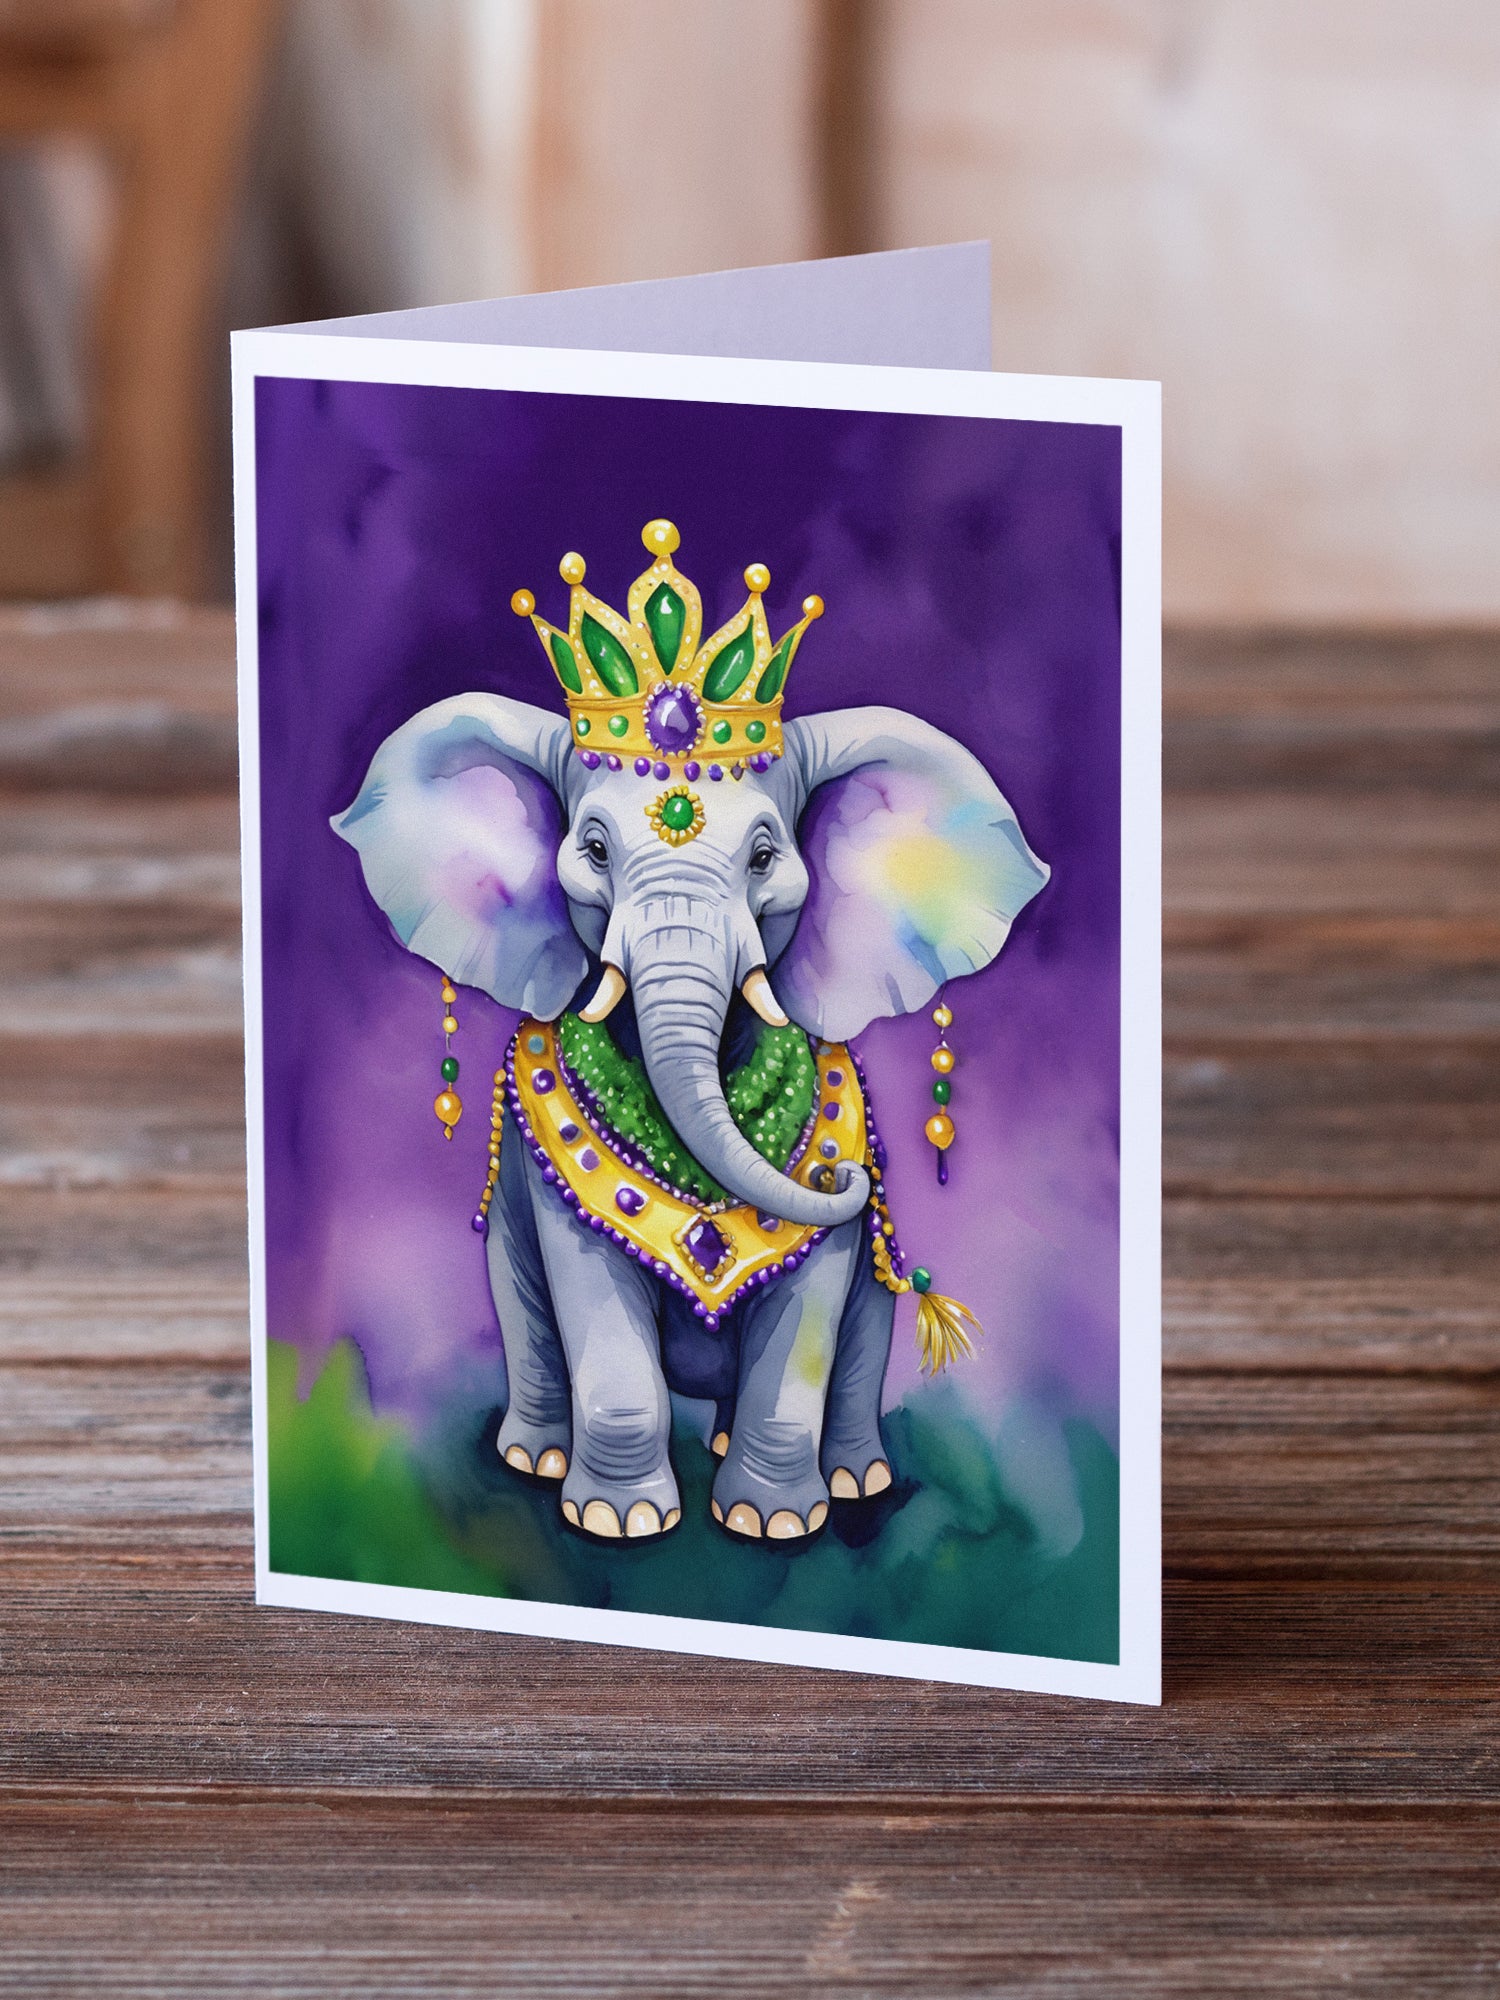 Elephant King of Mardi Gras Greeting Cards Pack of 8